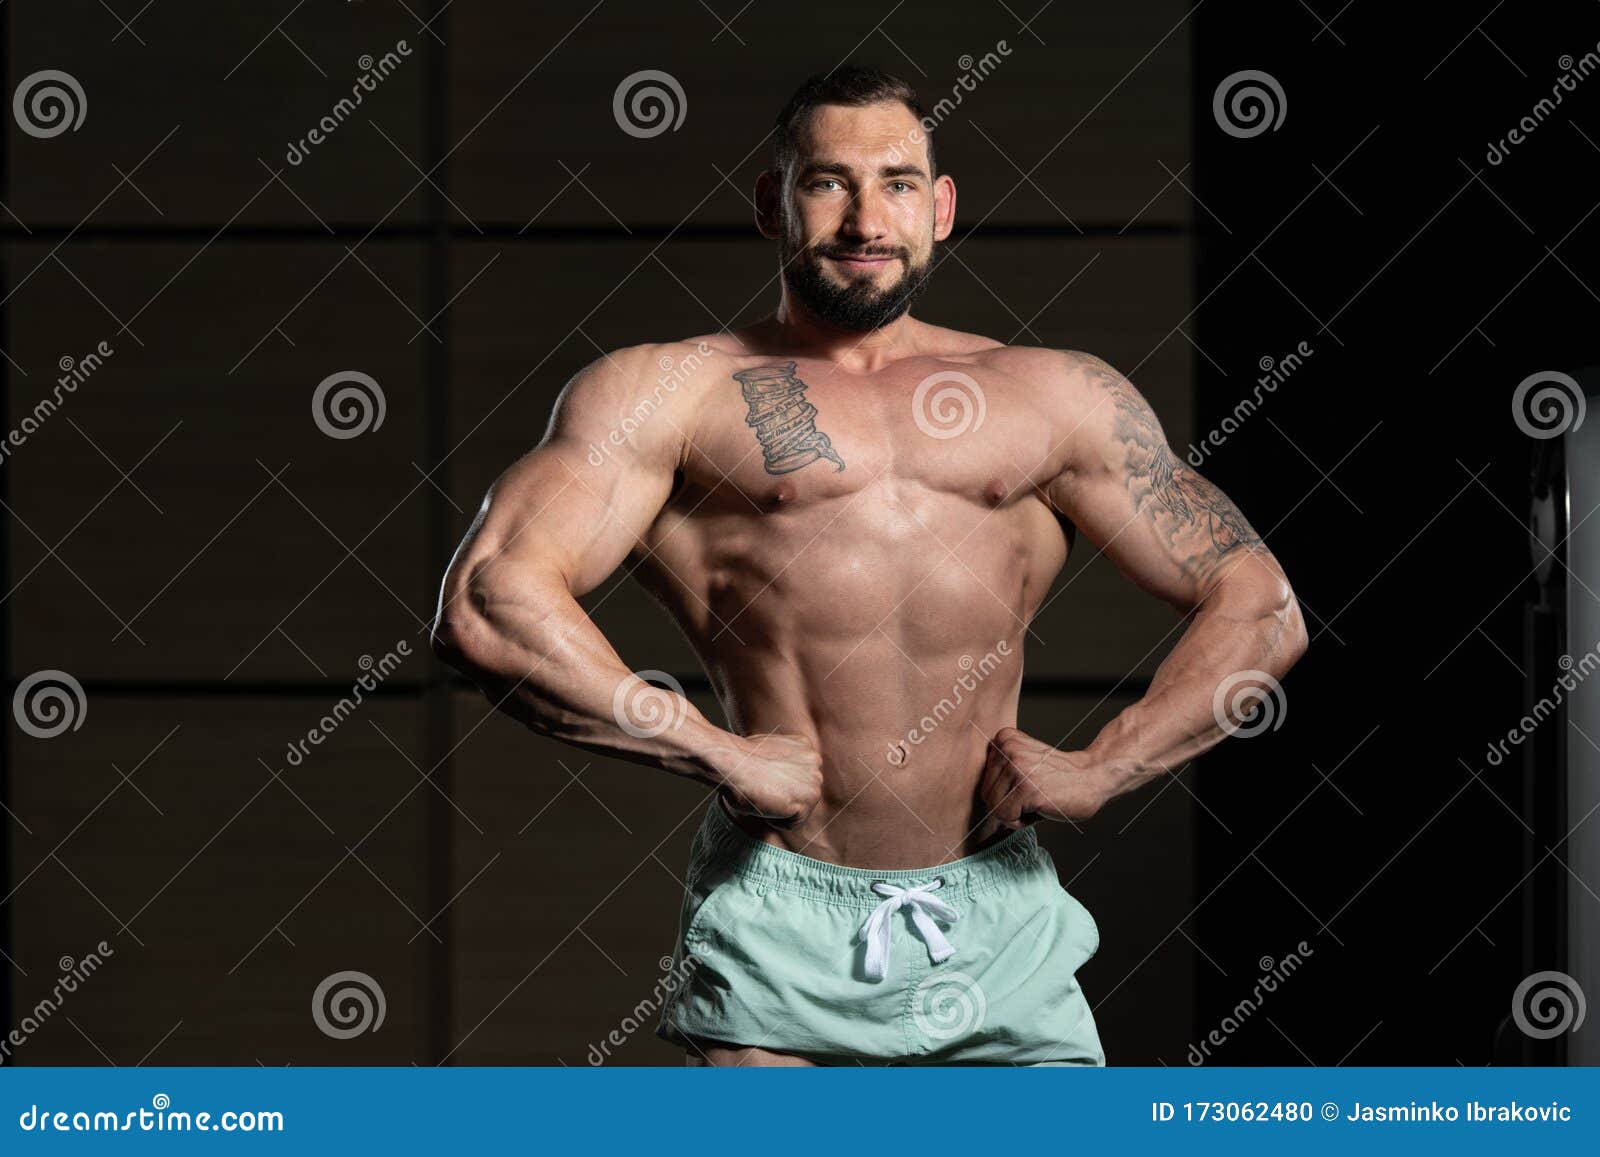 Handsome Muscular Man Flexing Muscles In Gym Stock Image 